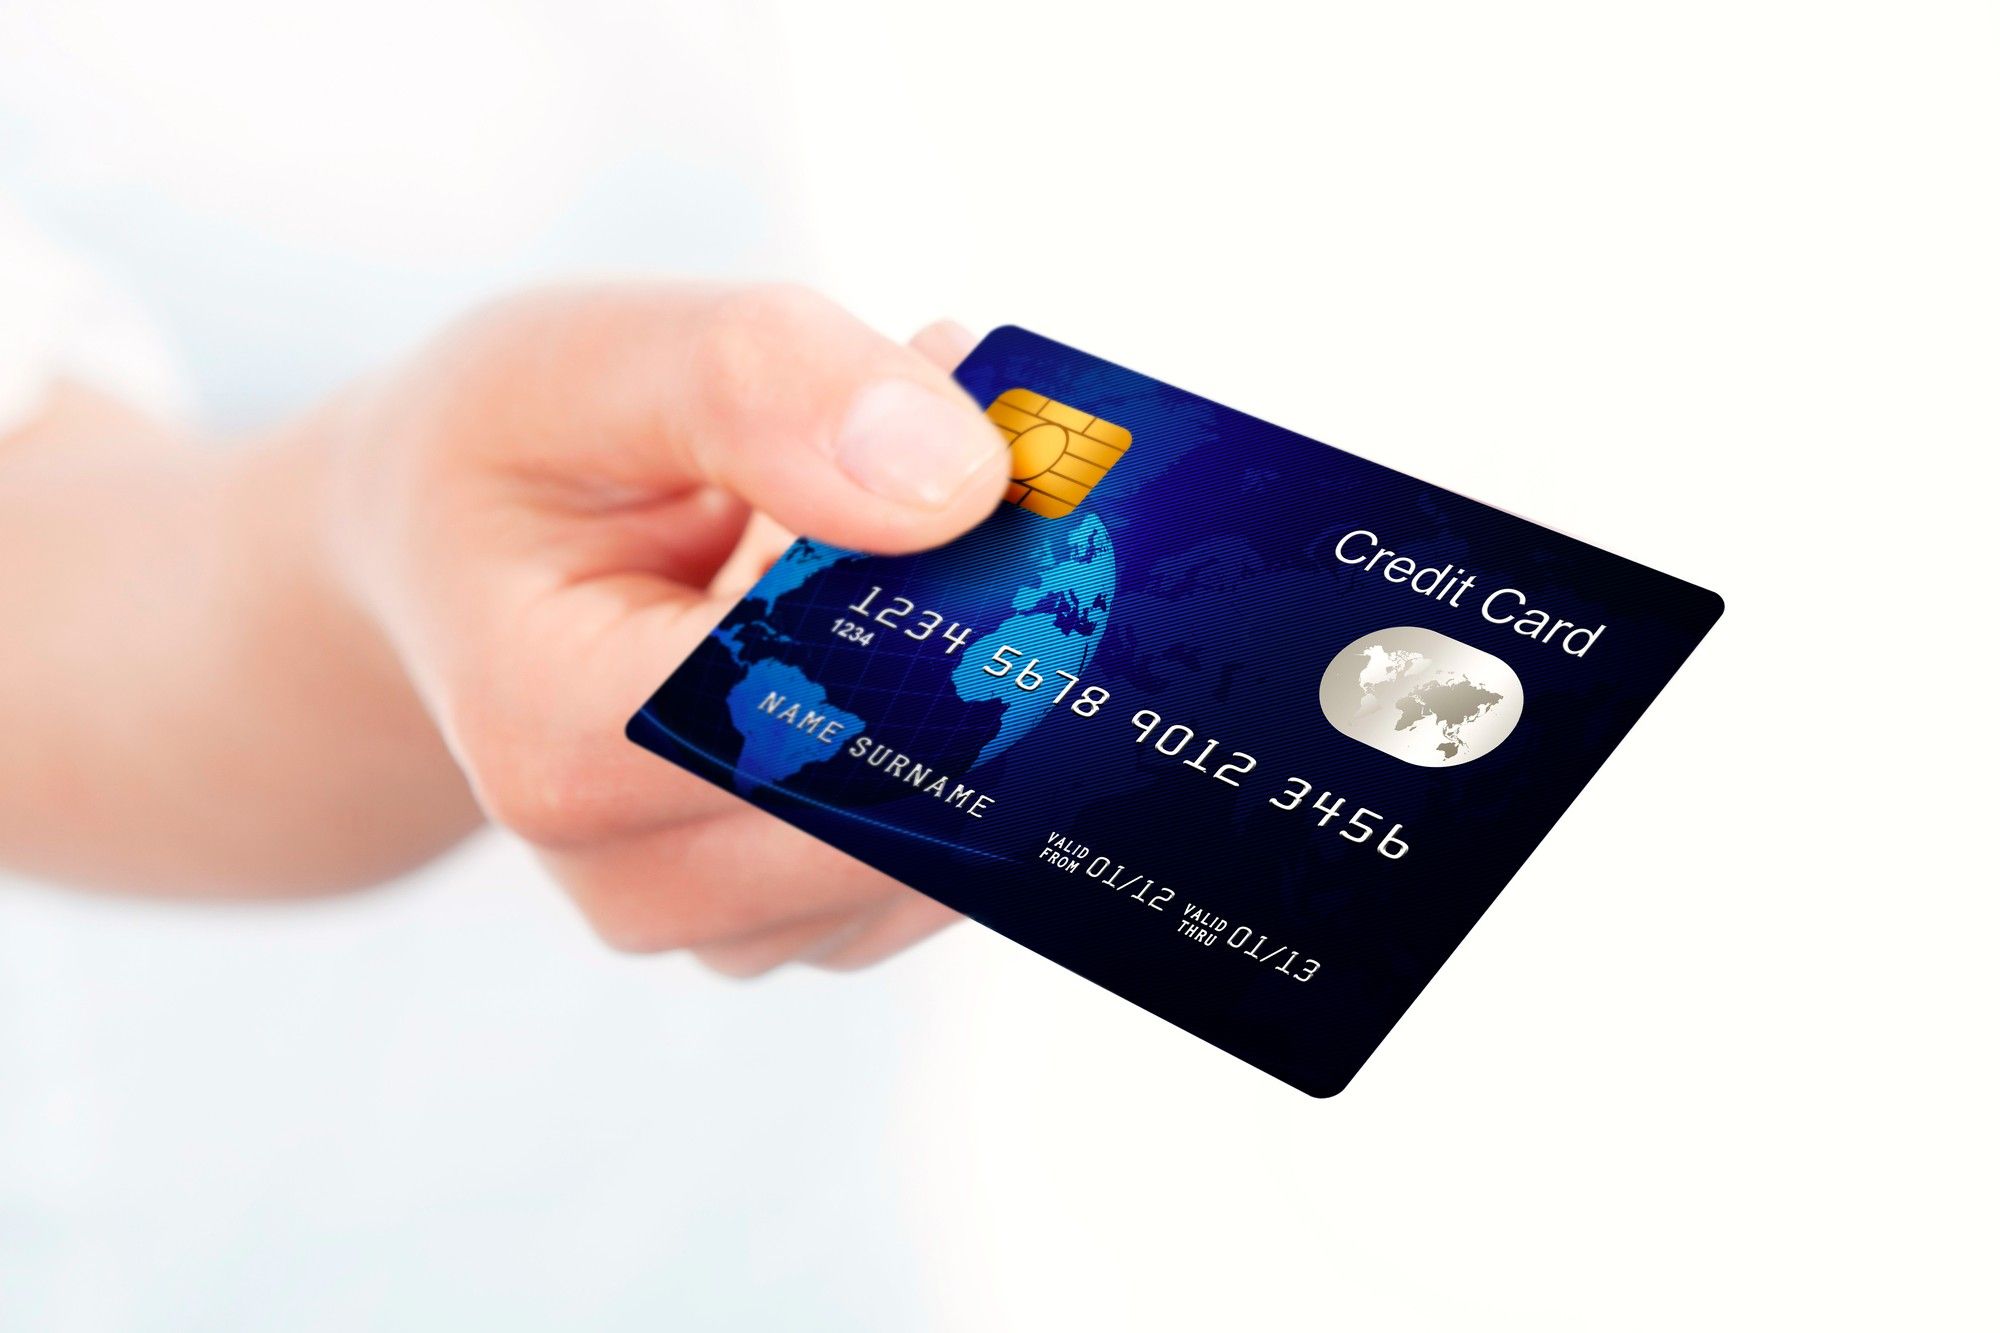 Blue credit card held by hand